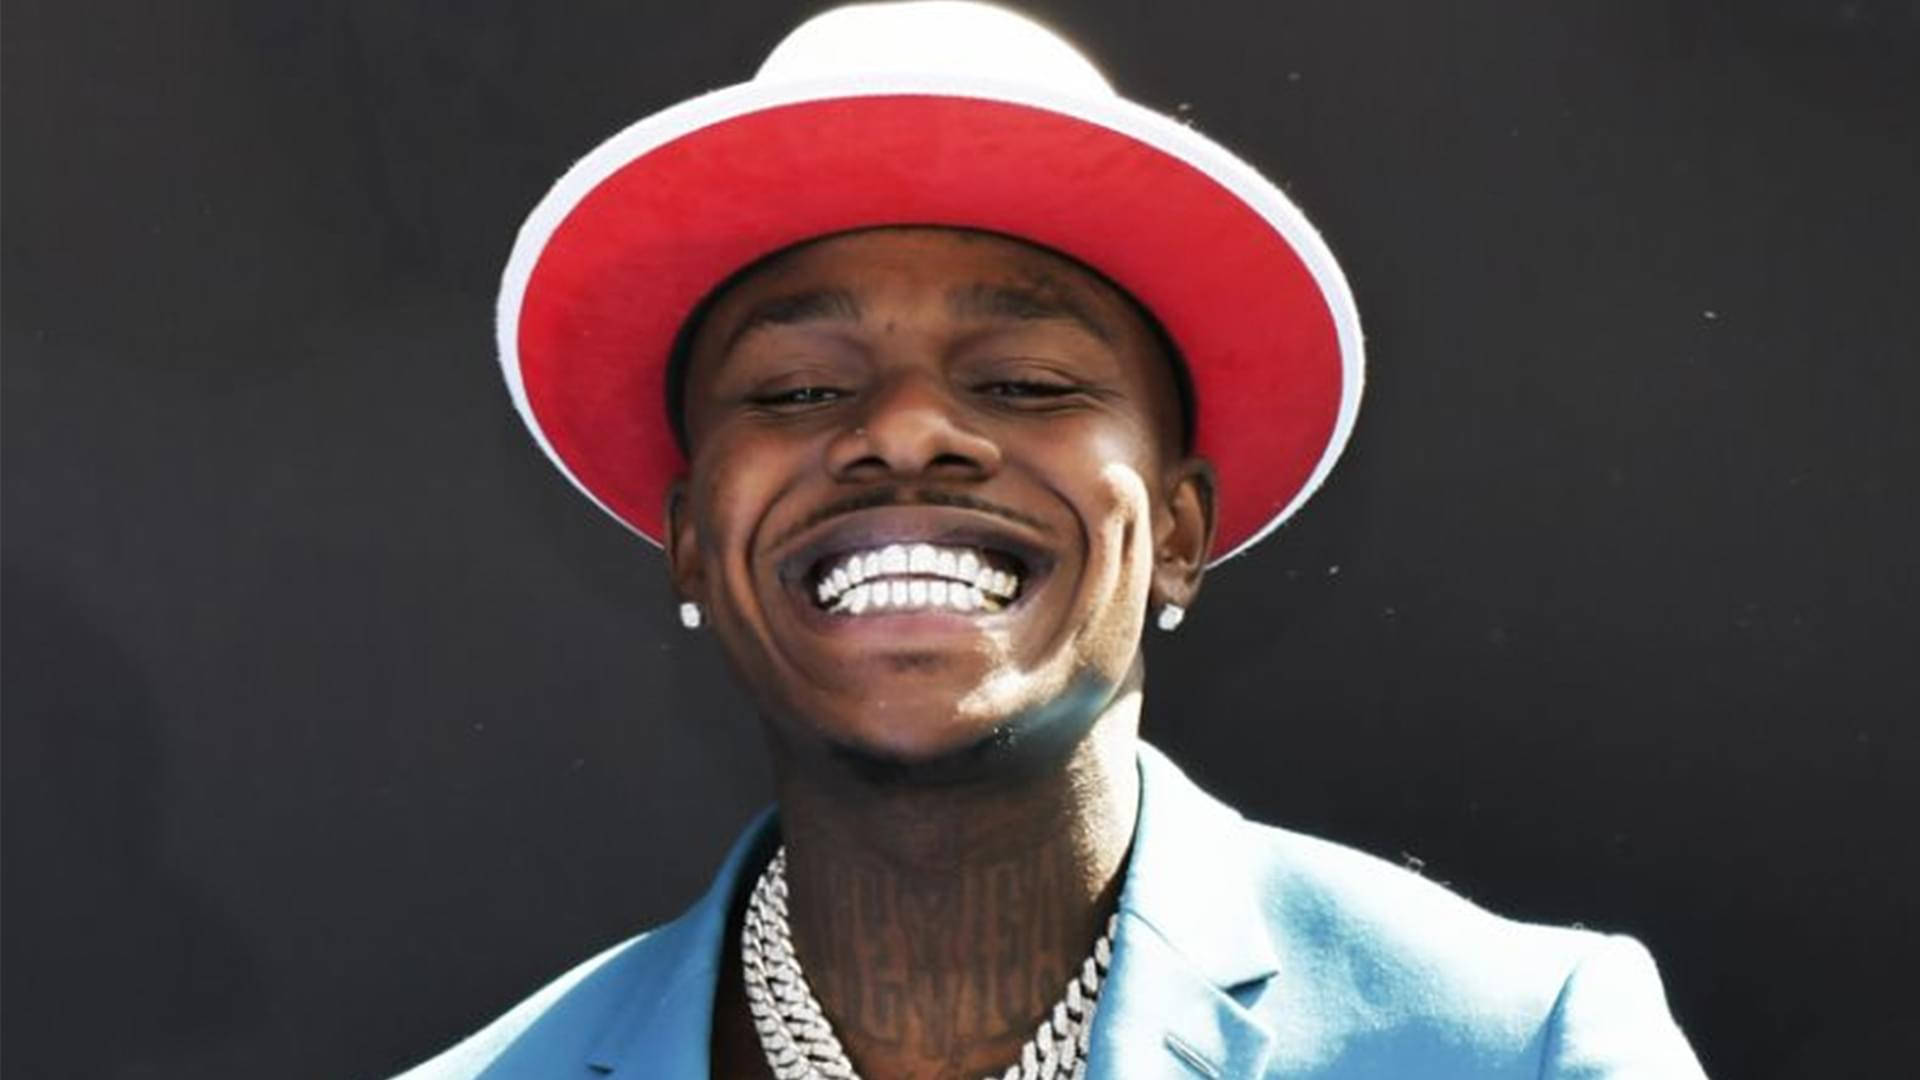 Caption: Dababy In Action - Dynamic Stage Performance